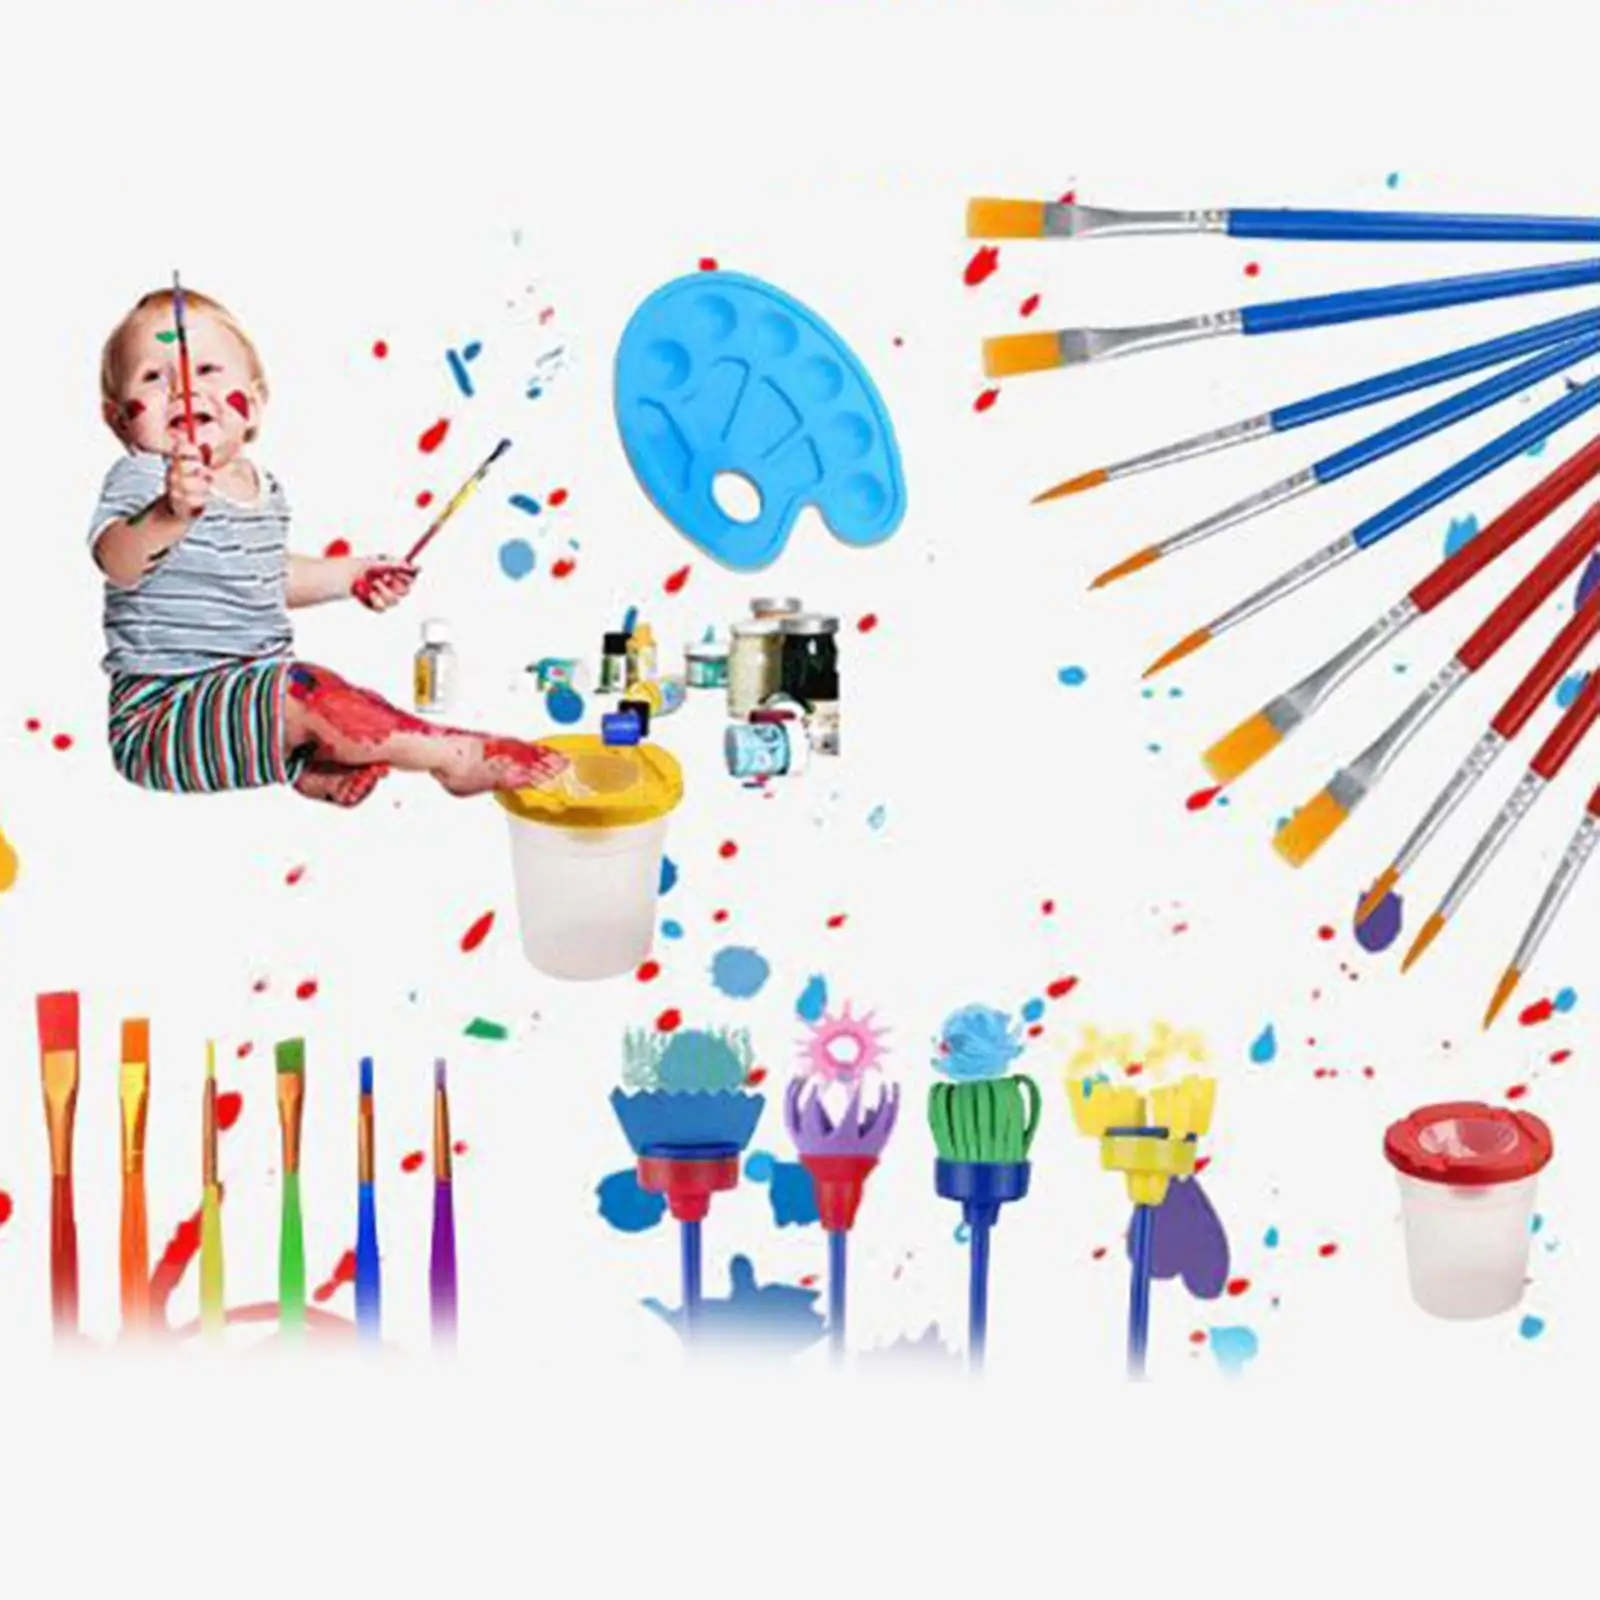 39pcs Toddlers Painting Brushes Palette Drawing Tools Kit Arts